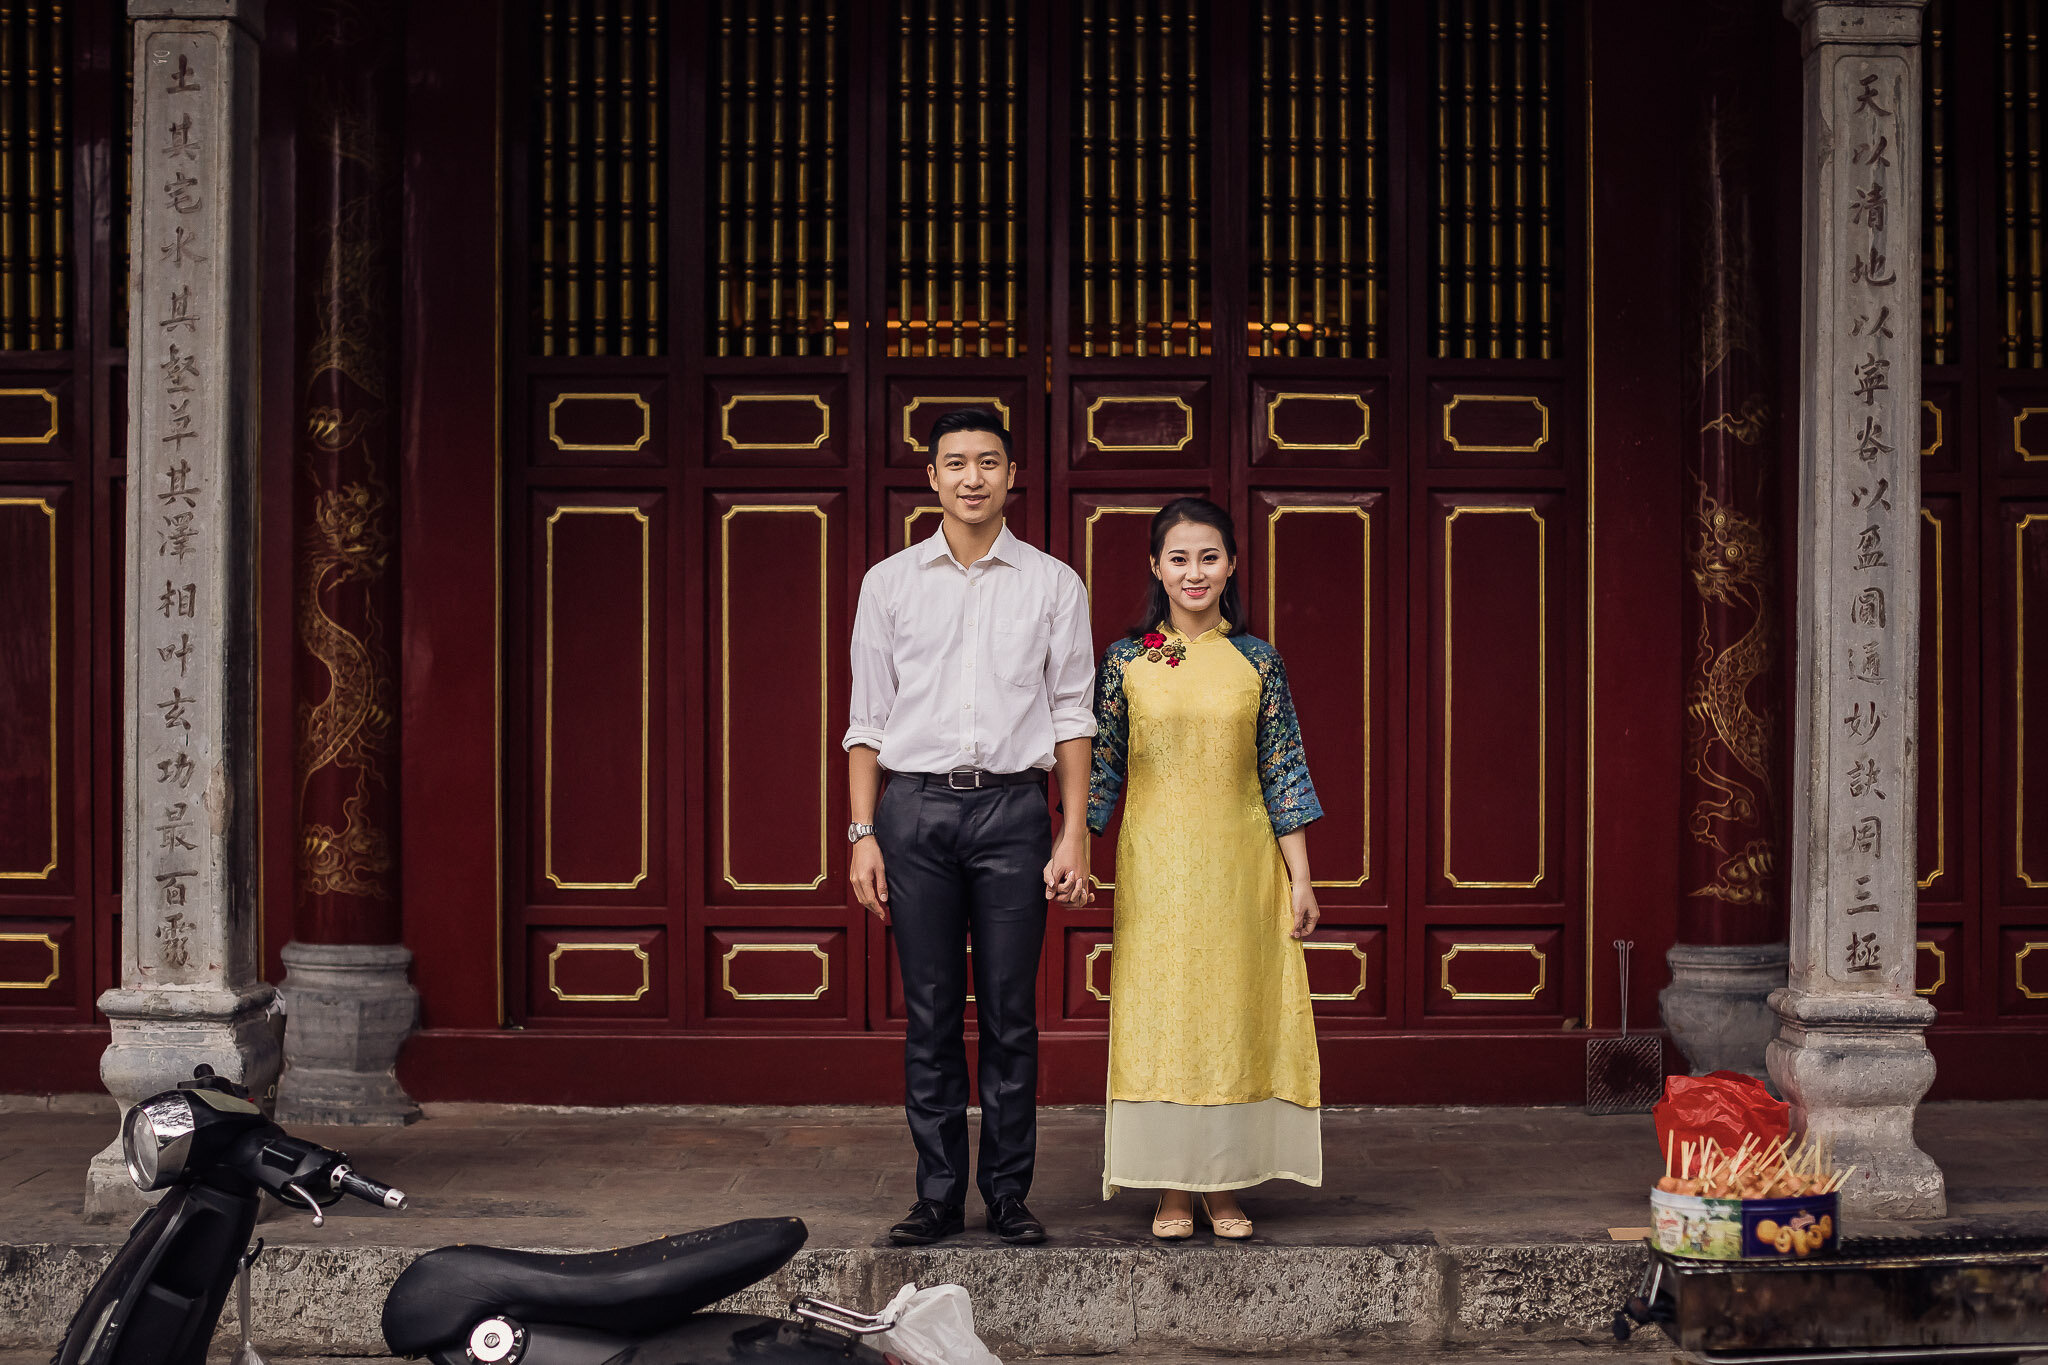 HANOI OLD QUARTER WEDDING PORTRAIT SESSION Photographed by Top Indian Wedding Photographer Manish and Sung Photography.